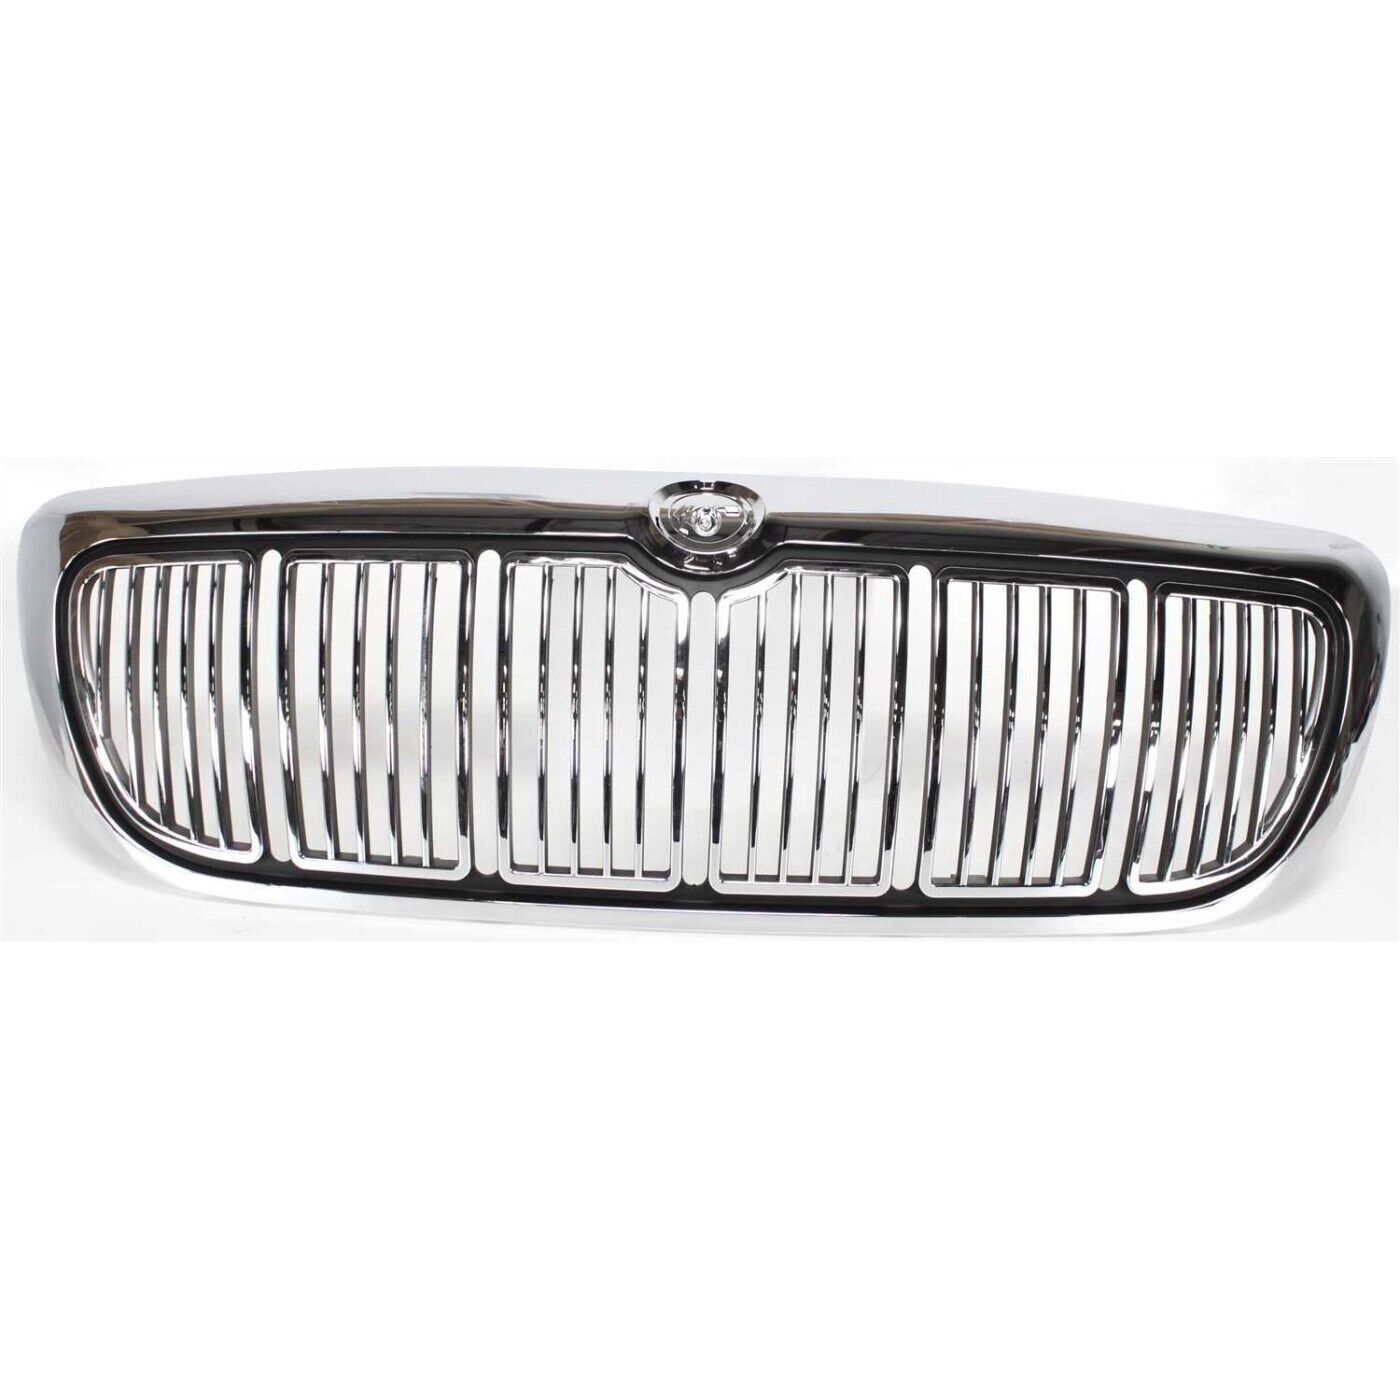 Grille For 1998-2002 Mercury Grand Marquis Chrome Shell and Painted Black Insert